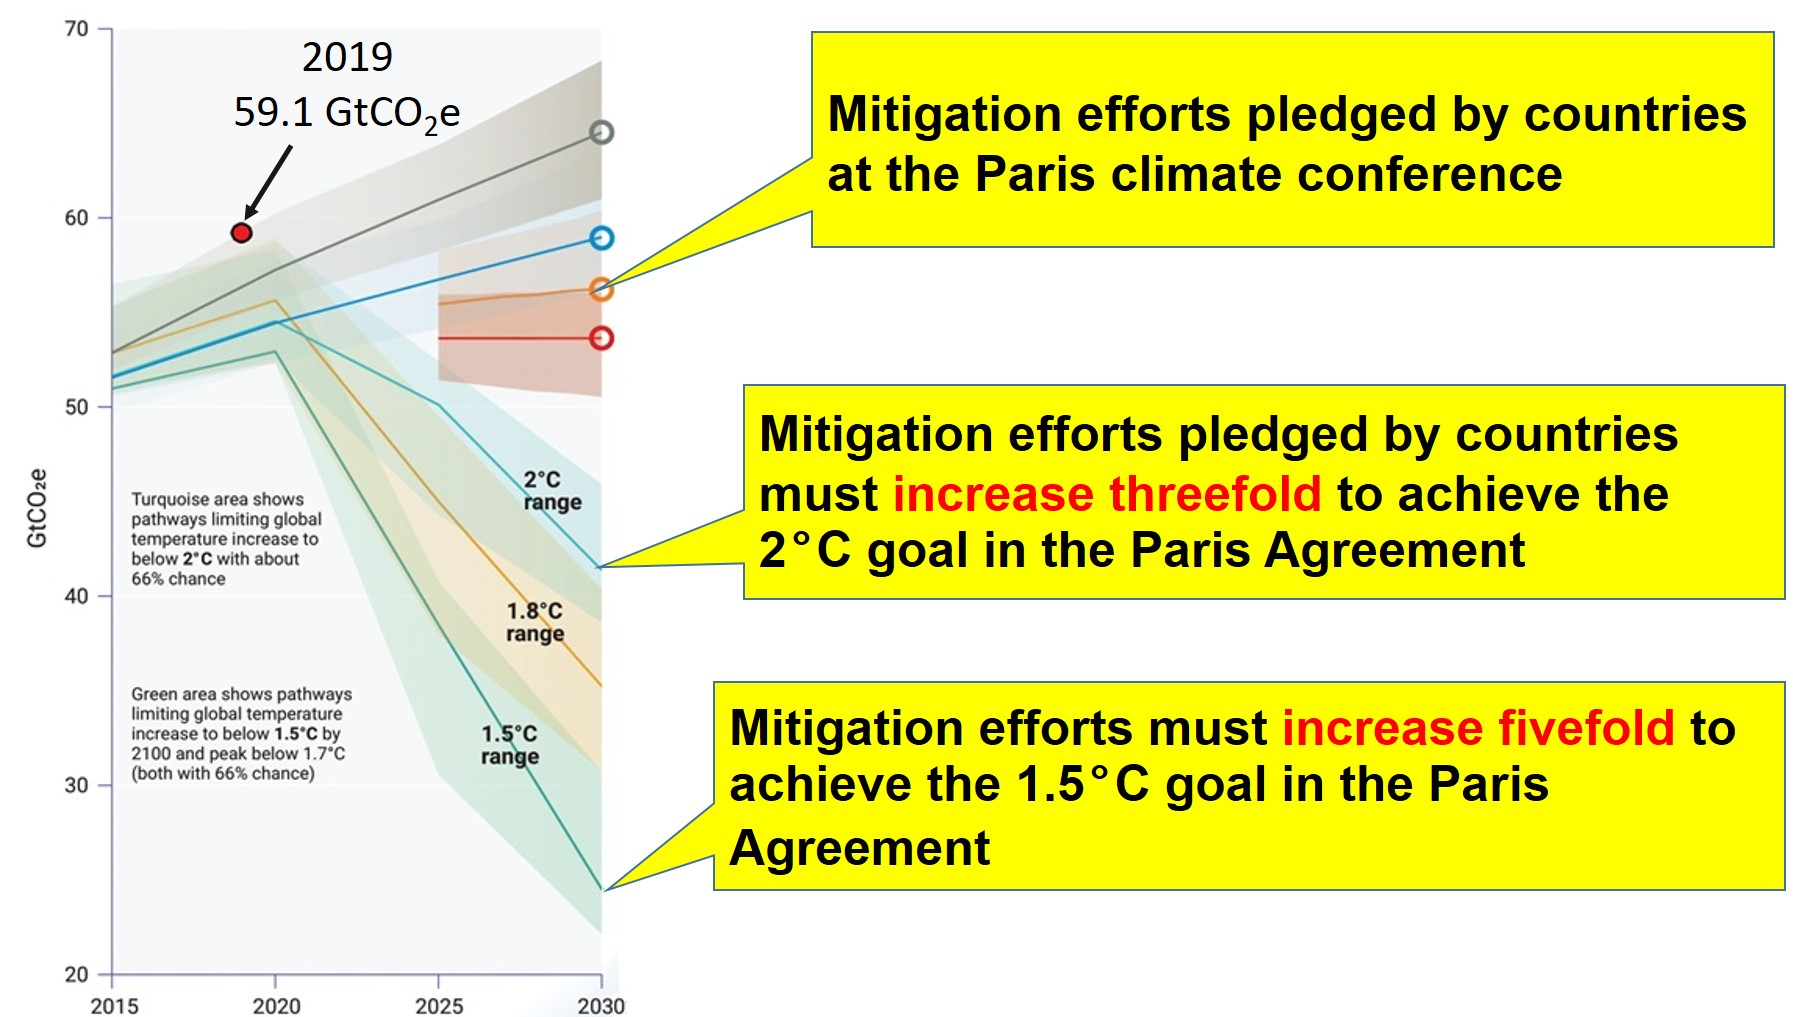 Countries need to redouble their efforts to reduce emissions in order to achieve the goal of the Paris Agreement